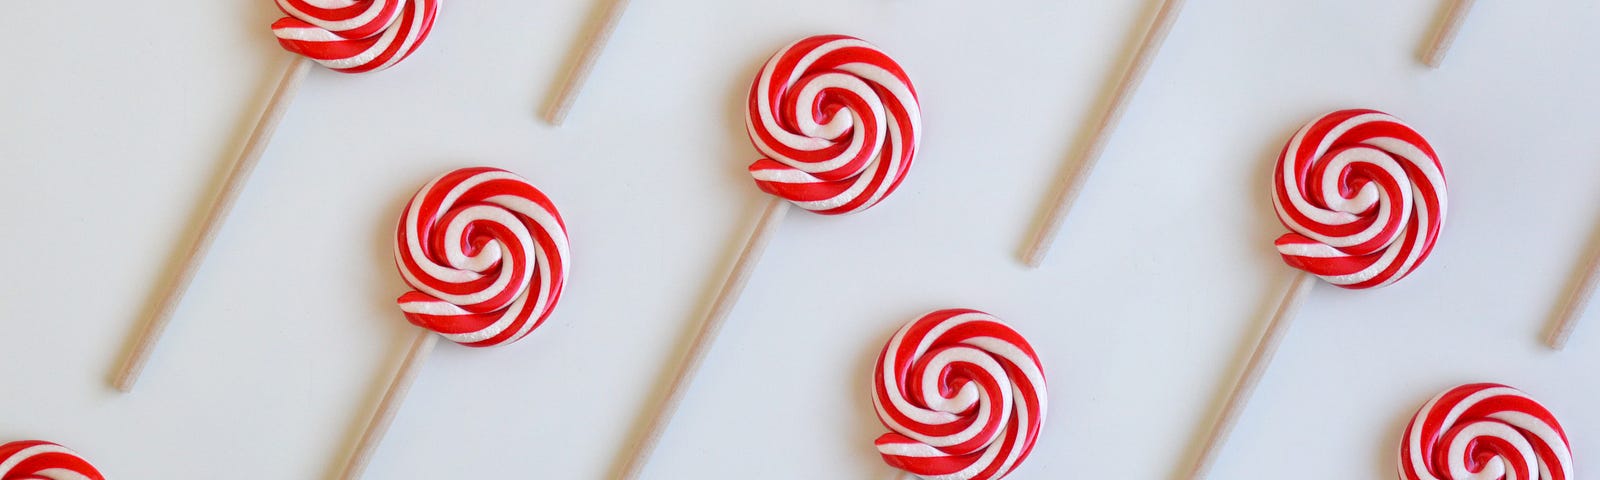 This image is peppermint suckers on a white background.